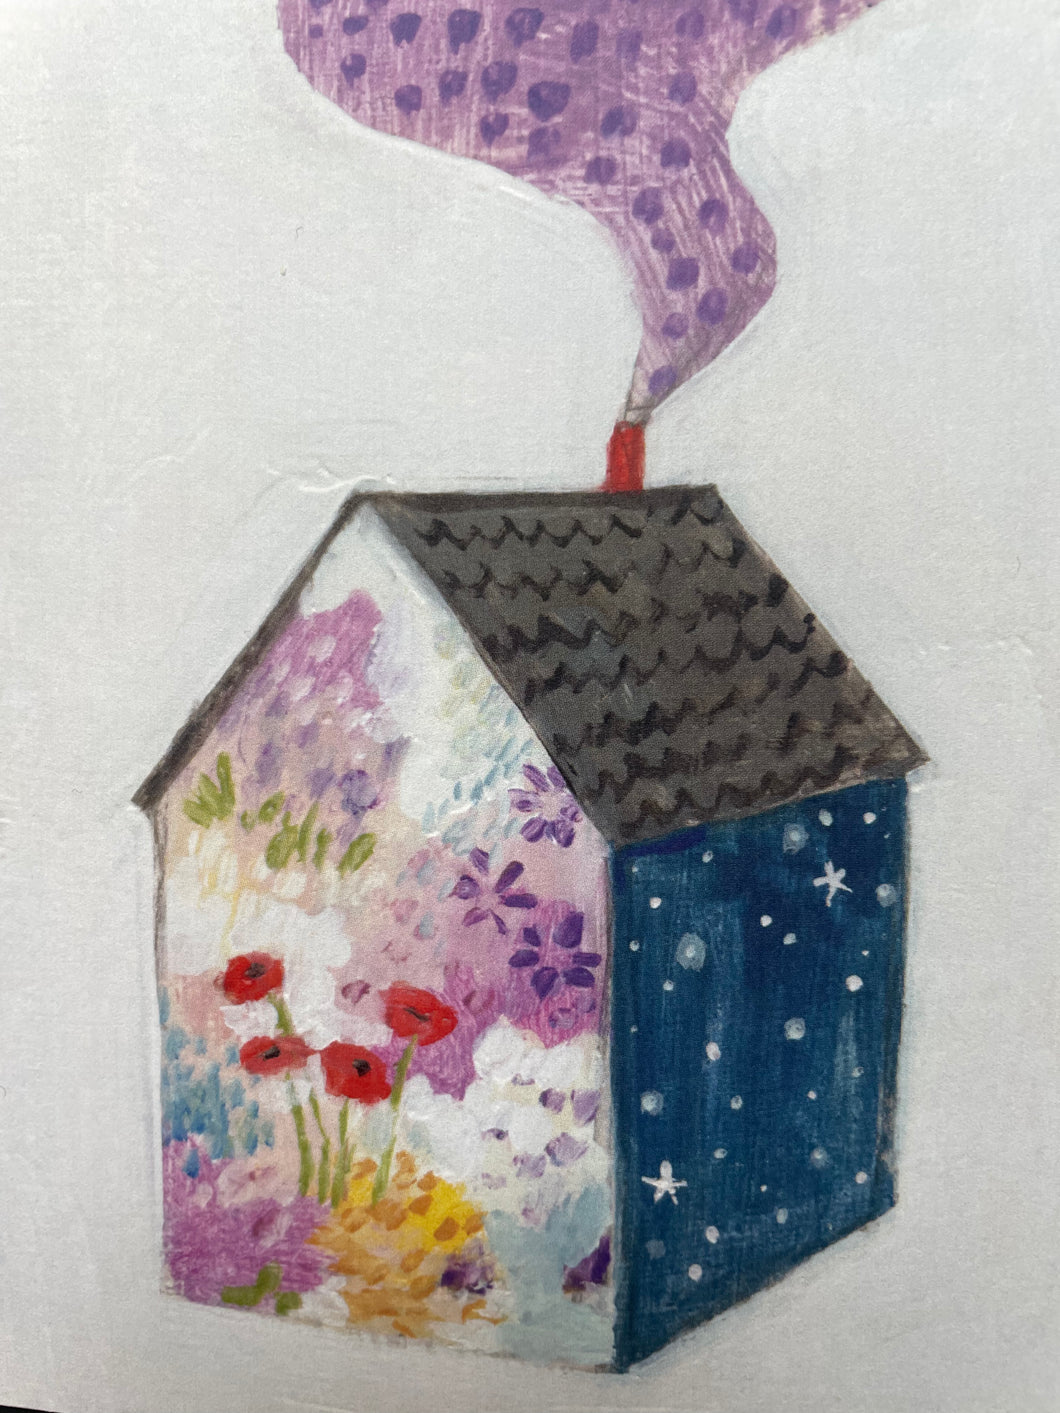 A home made of starlight and wildflowers - greeting card